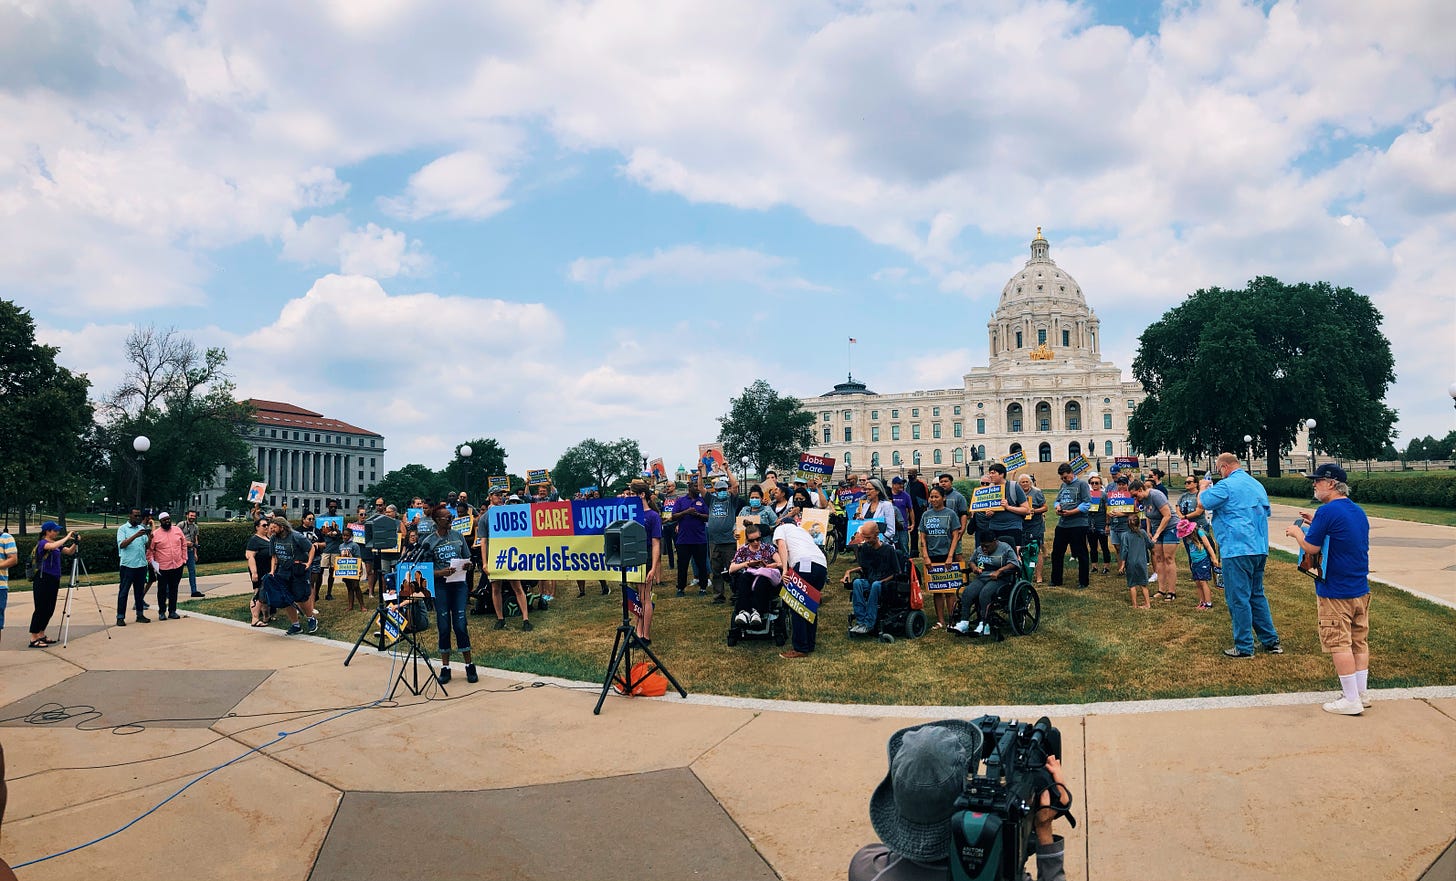 a crowd gathers on the front lawn of the state capitol building with signs saying "jobs care justice" as a newsperson points their camera at them